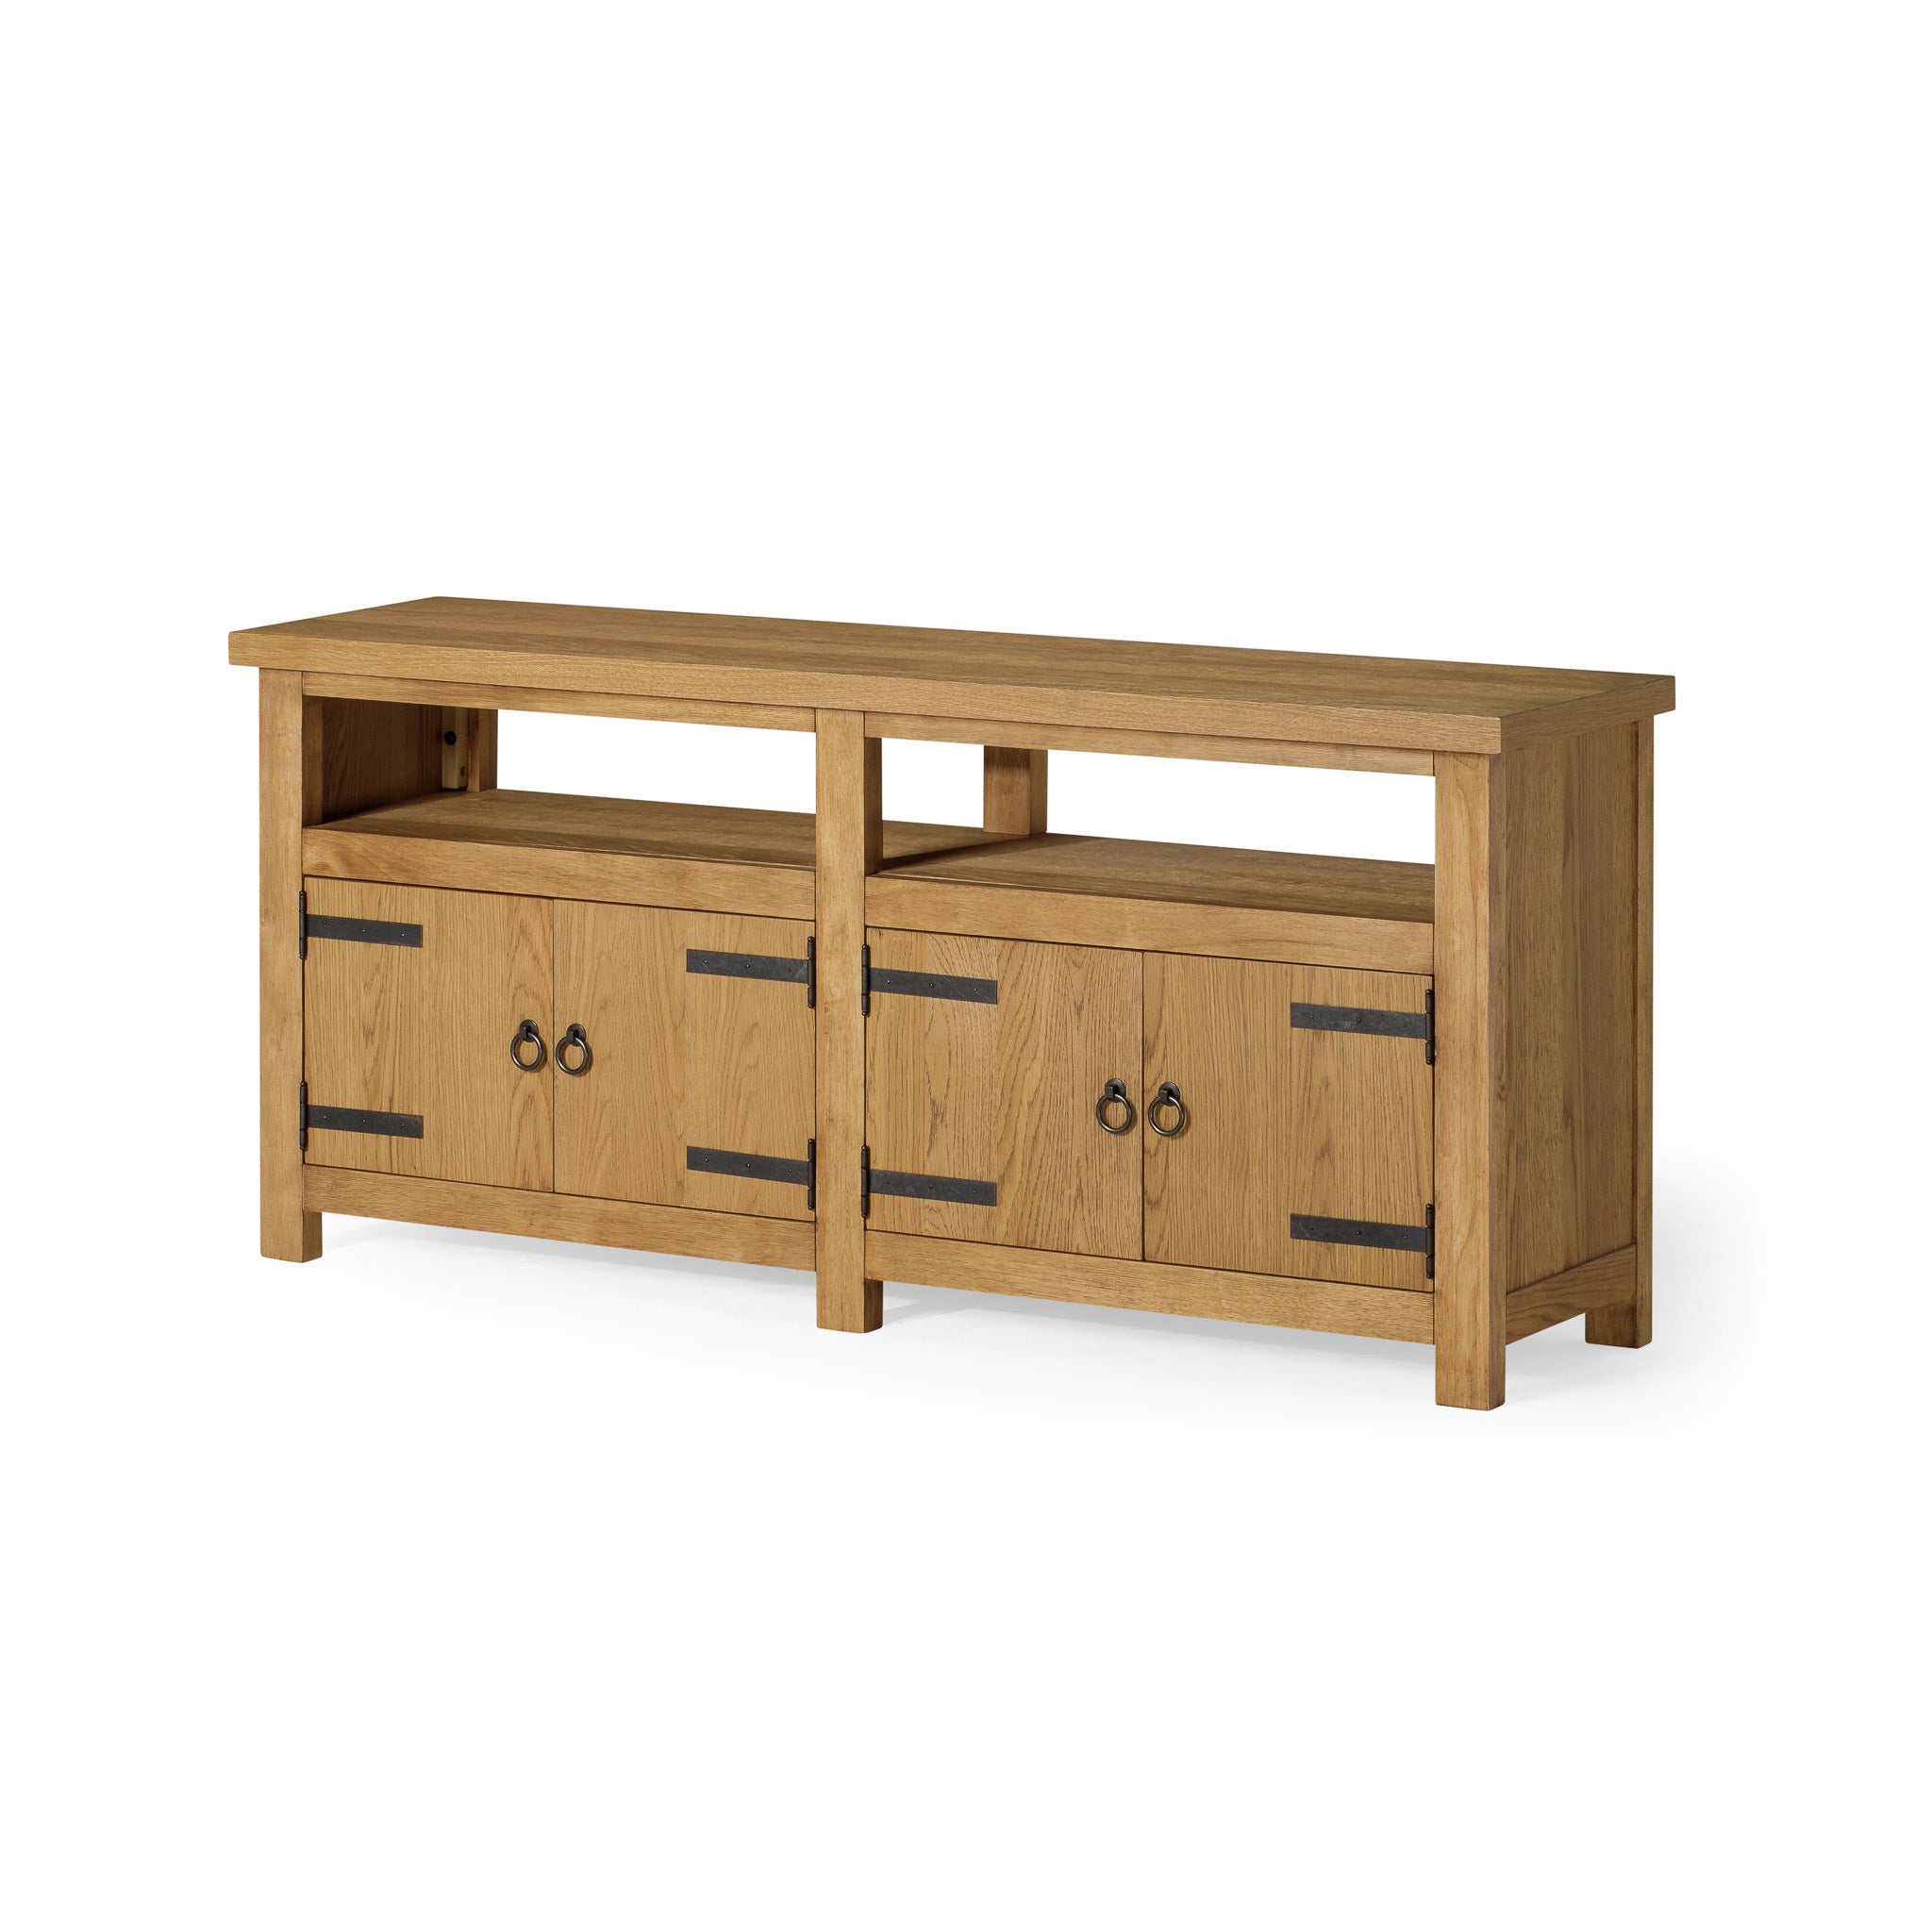 Luca Organic Wooden Media Unit in Weathered Natural Finish in Media Units by Maven Lane